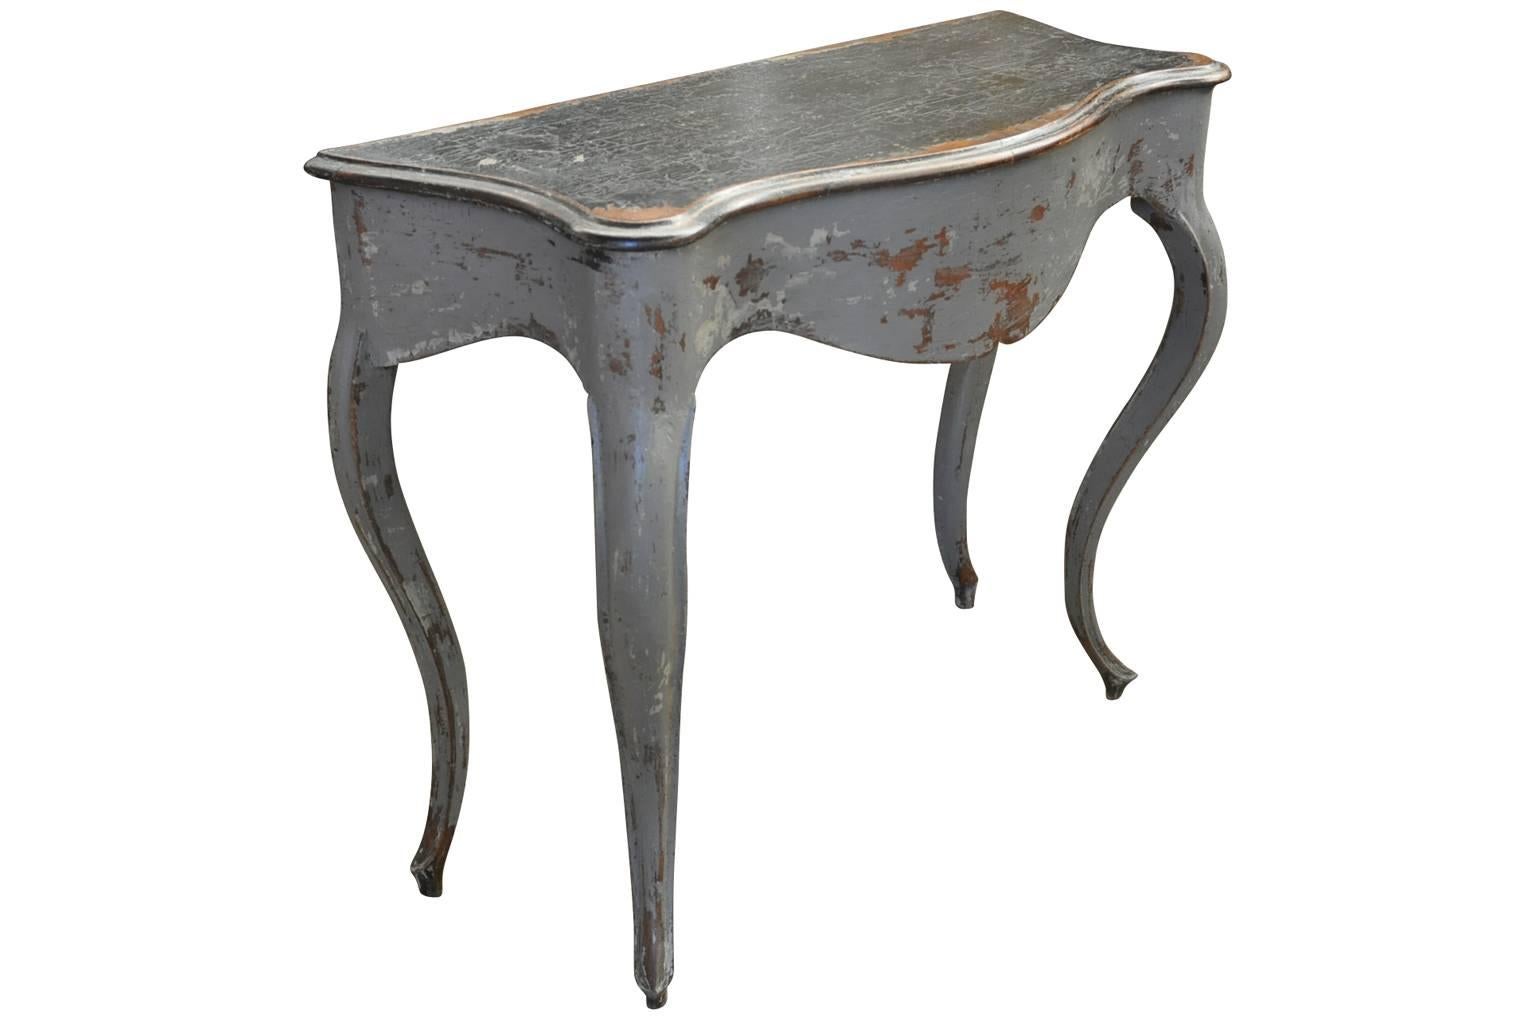 A very charming later 19th century Louis XV style console table in painted wood. Terrific painted finish.